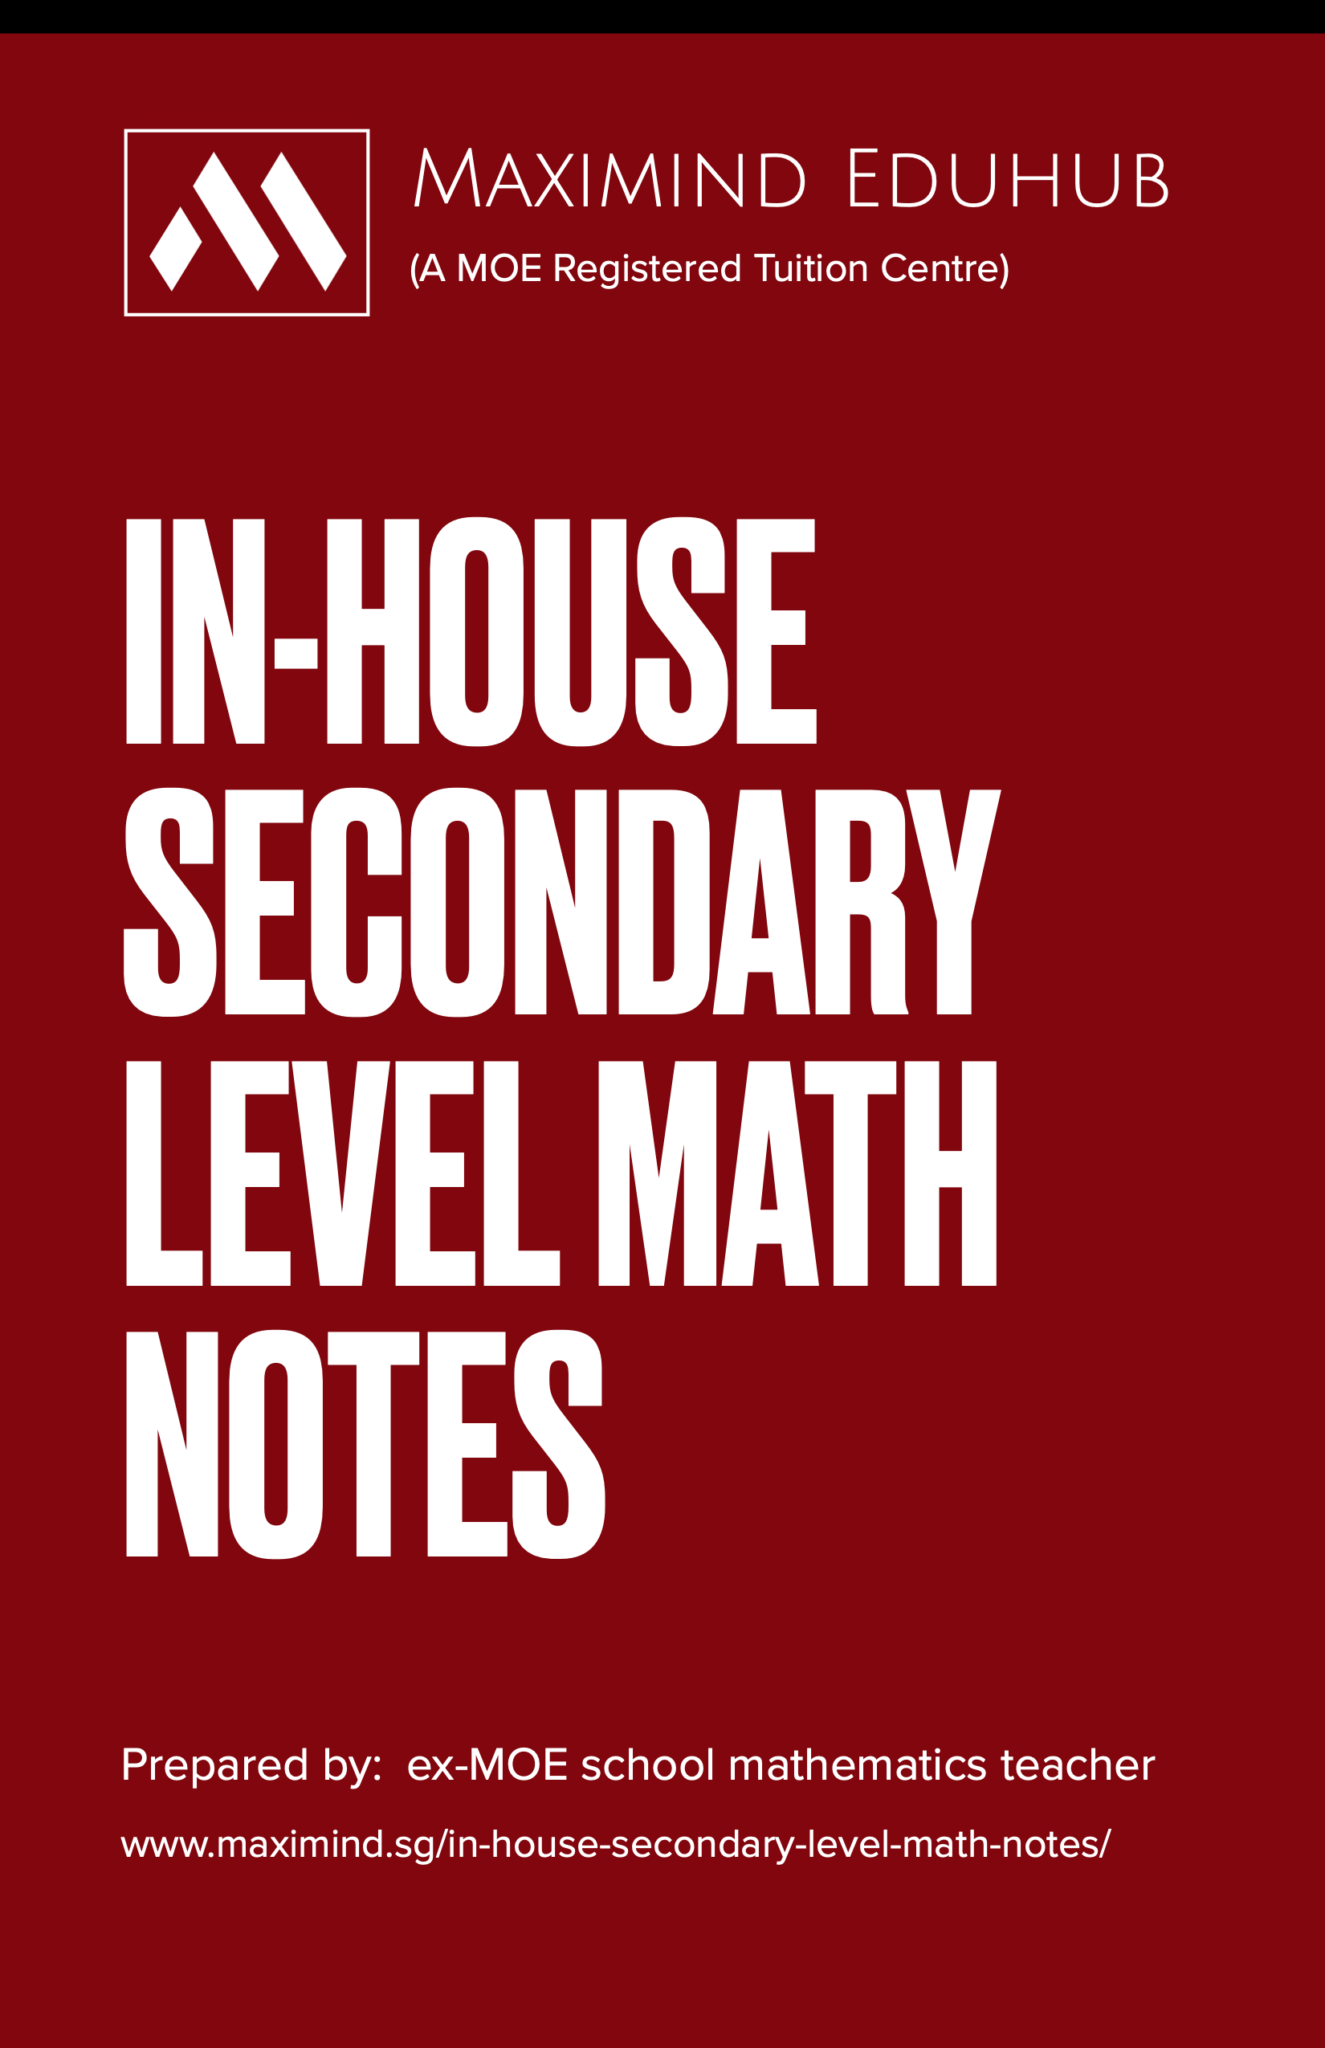 In-house Secondary Level Math Notes